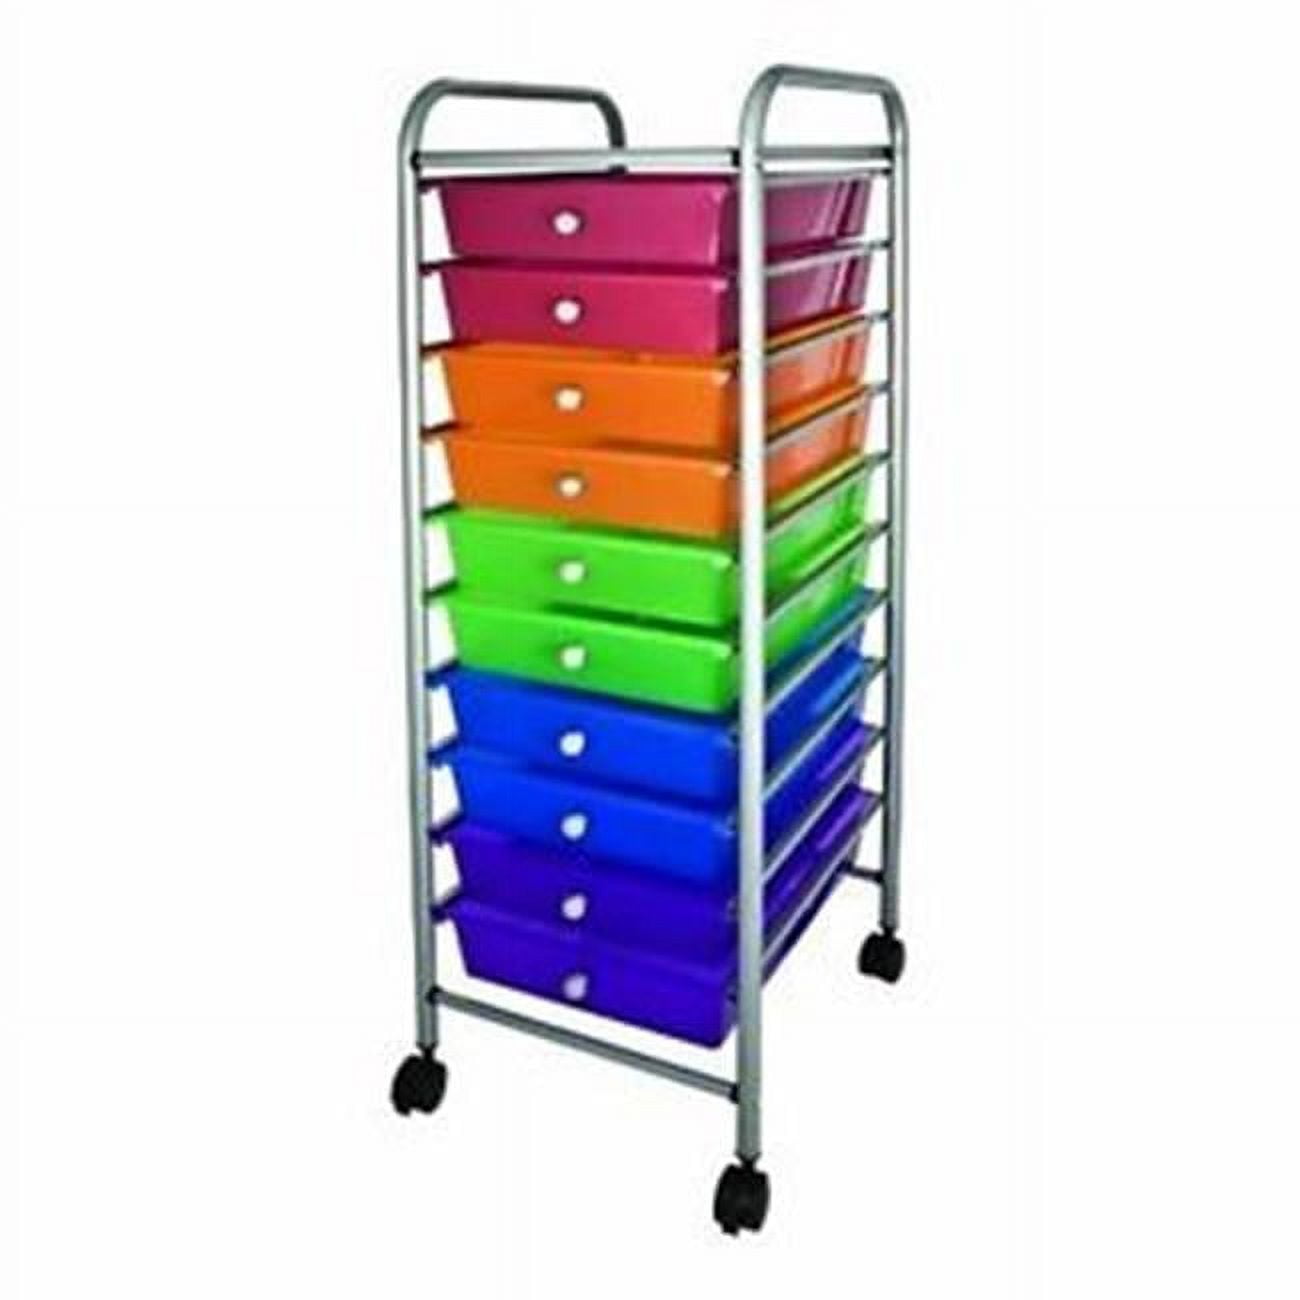 Advantus Corp.- Office 34004 10 Drawer Rolling Organizer - Multi-colored, 37.6 X 13 X 15.4 In.